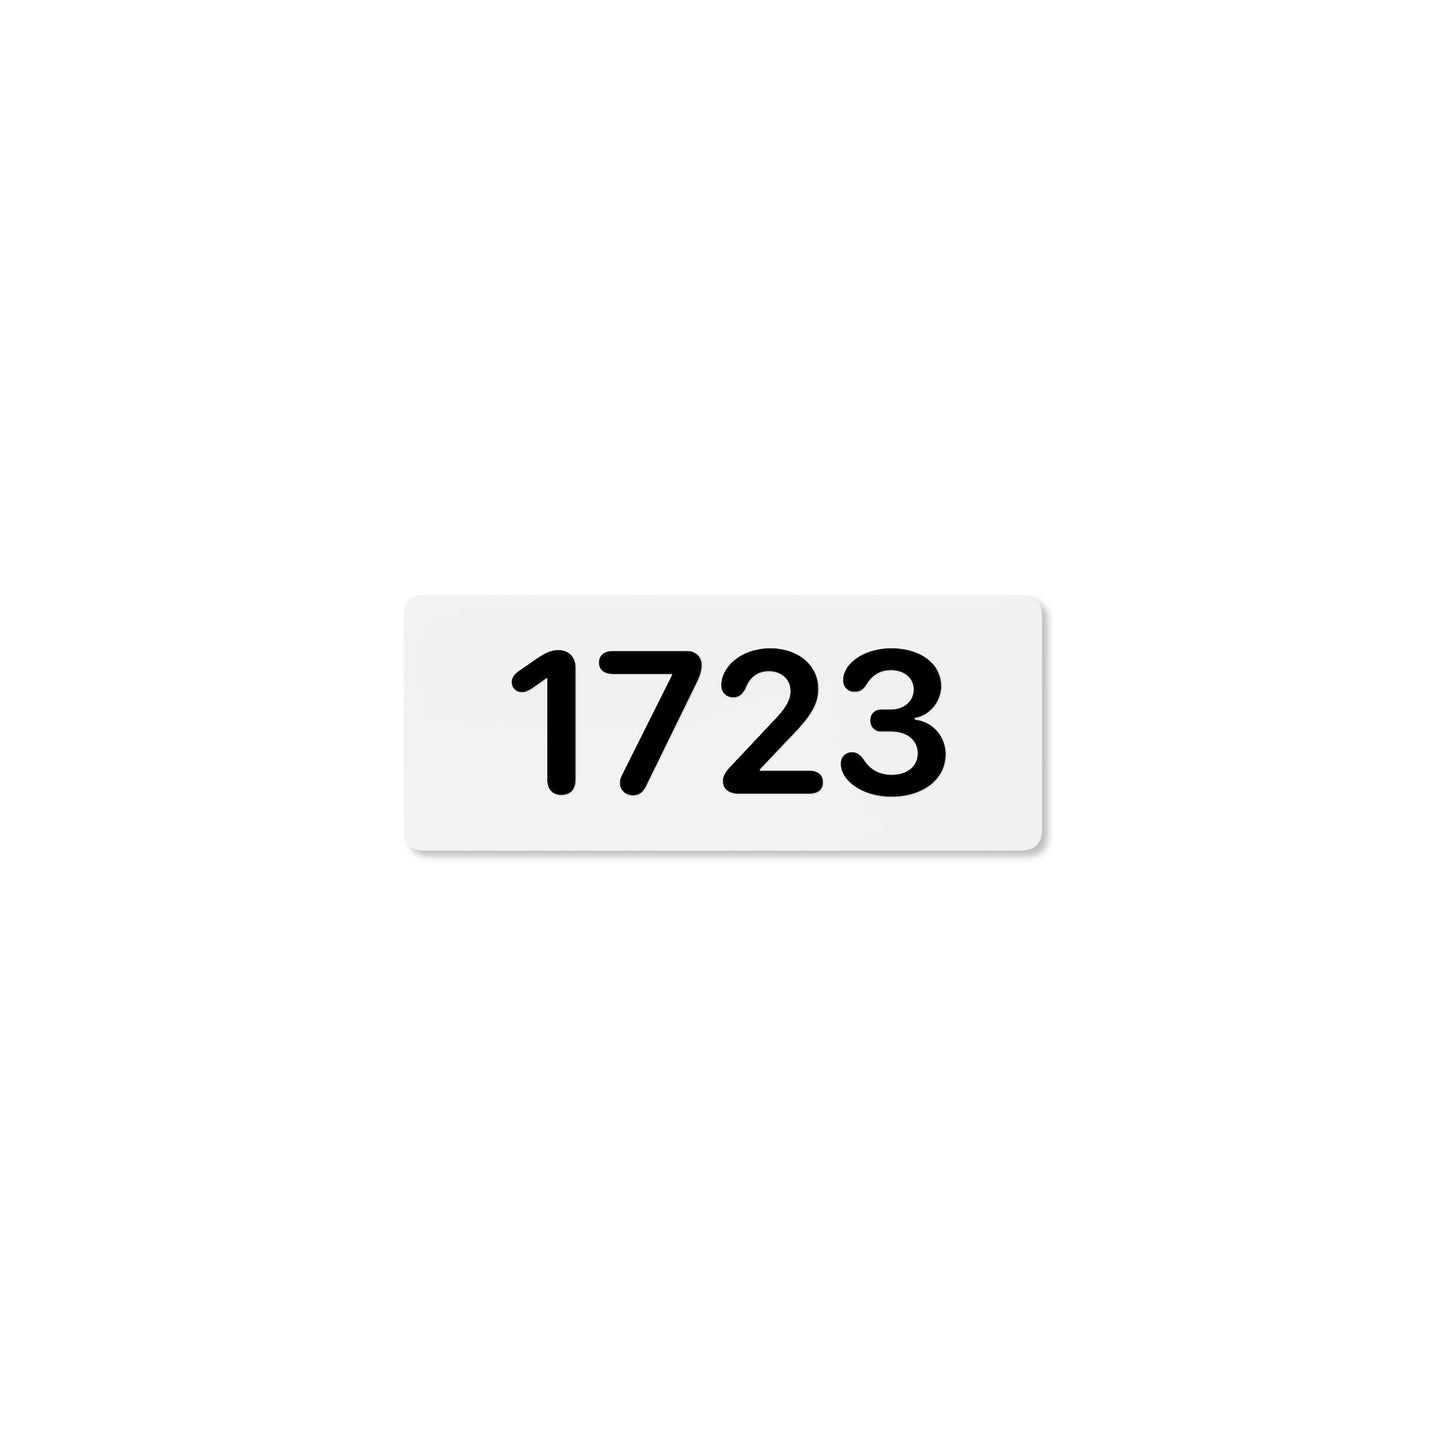 Numeral 1723